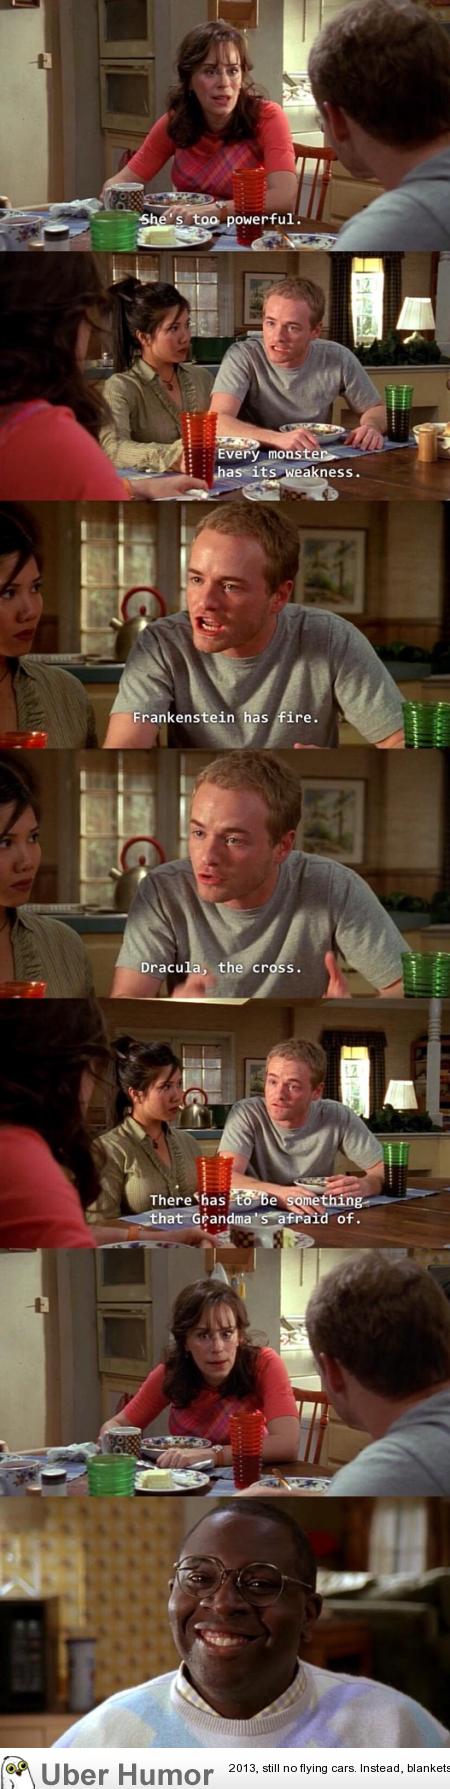 Malcom in the Middle. | Funny Pictures, Quotes, Pics, Photos, Images ...